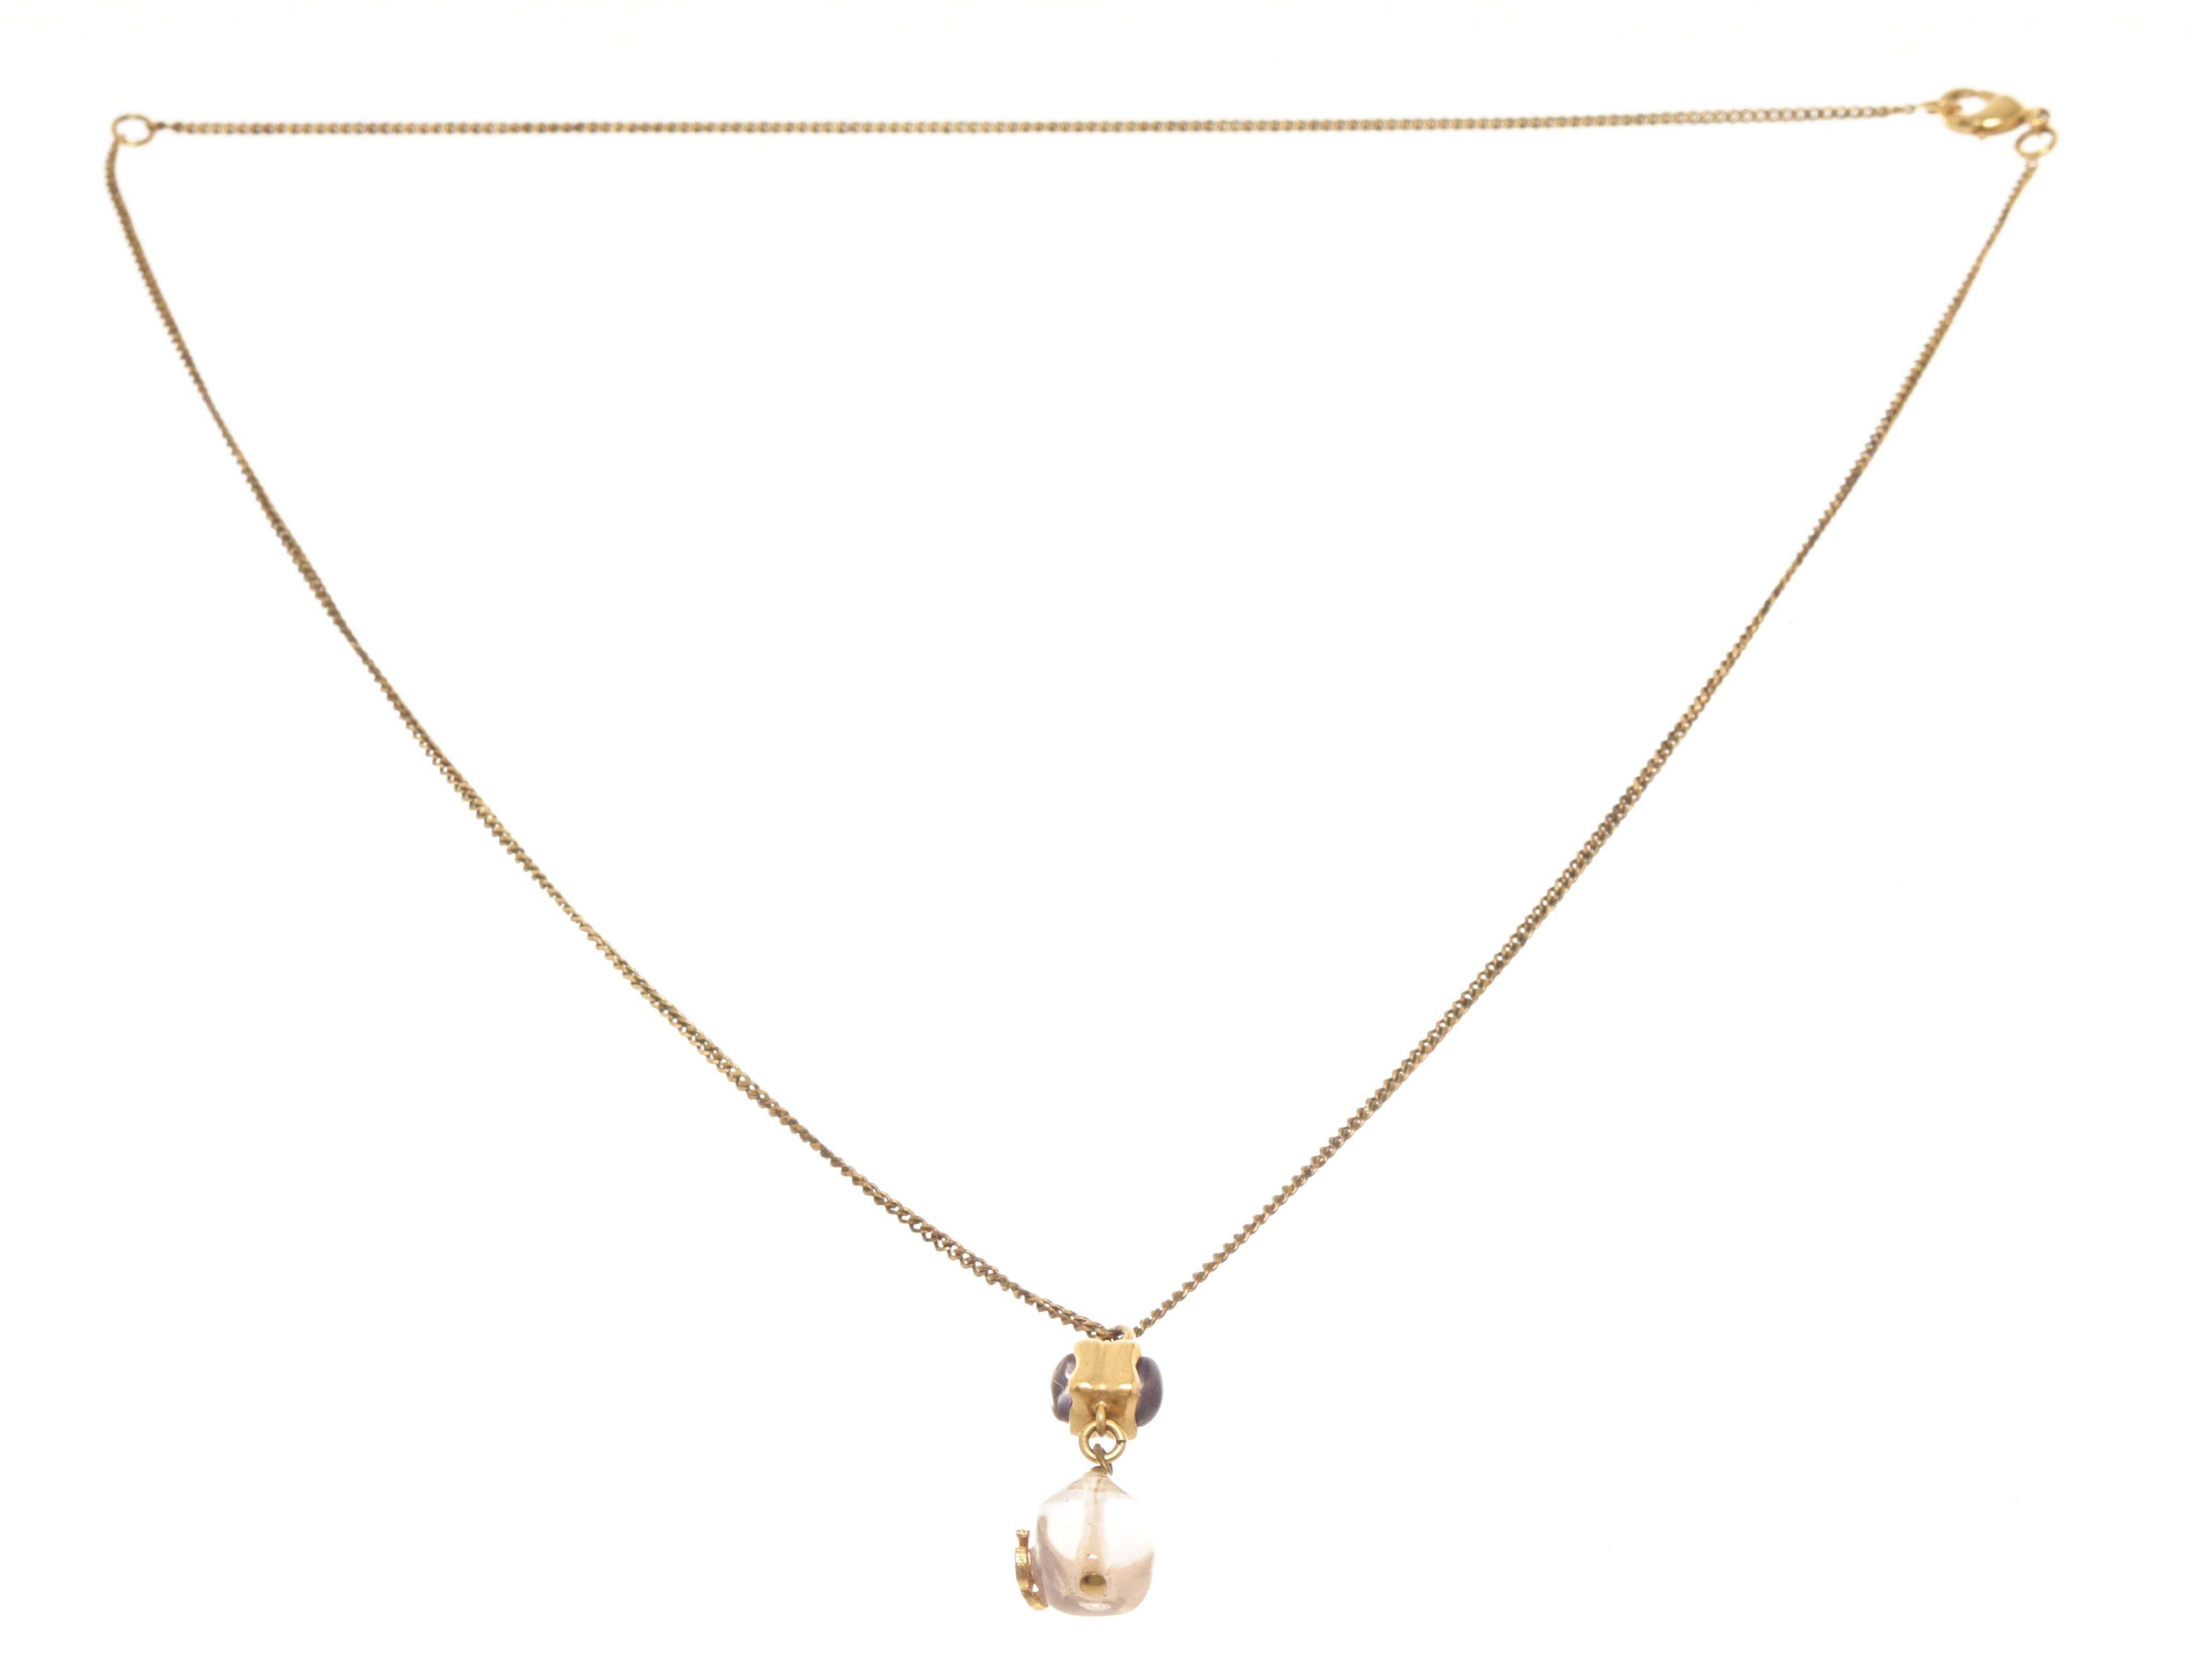 Chanel gold gem long necklace with gold-tone chain, lobster claw closure, and a clear pink gem pendant with a CC logo dangling. 


770036MSC